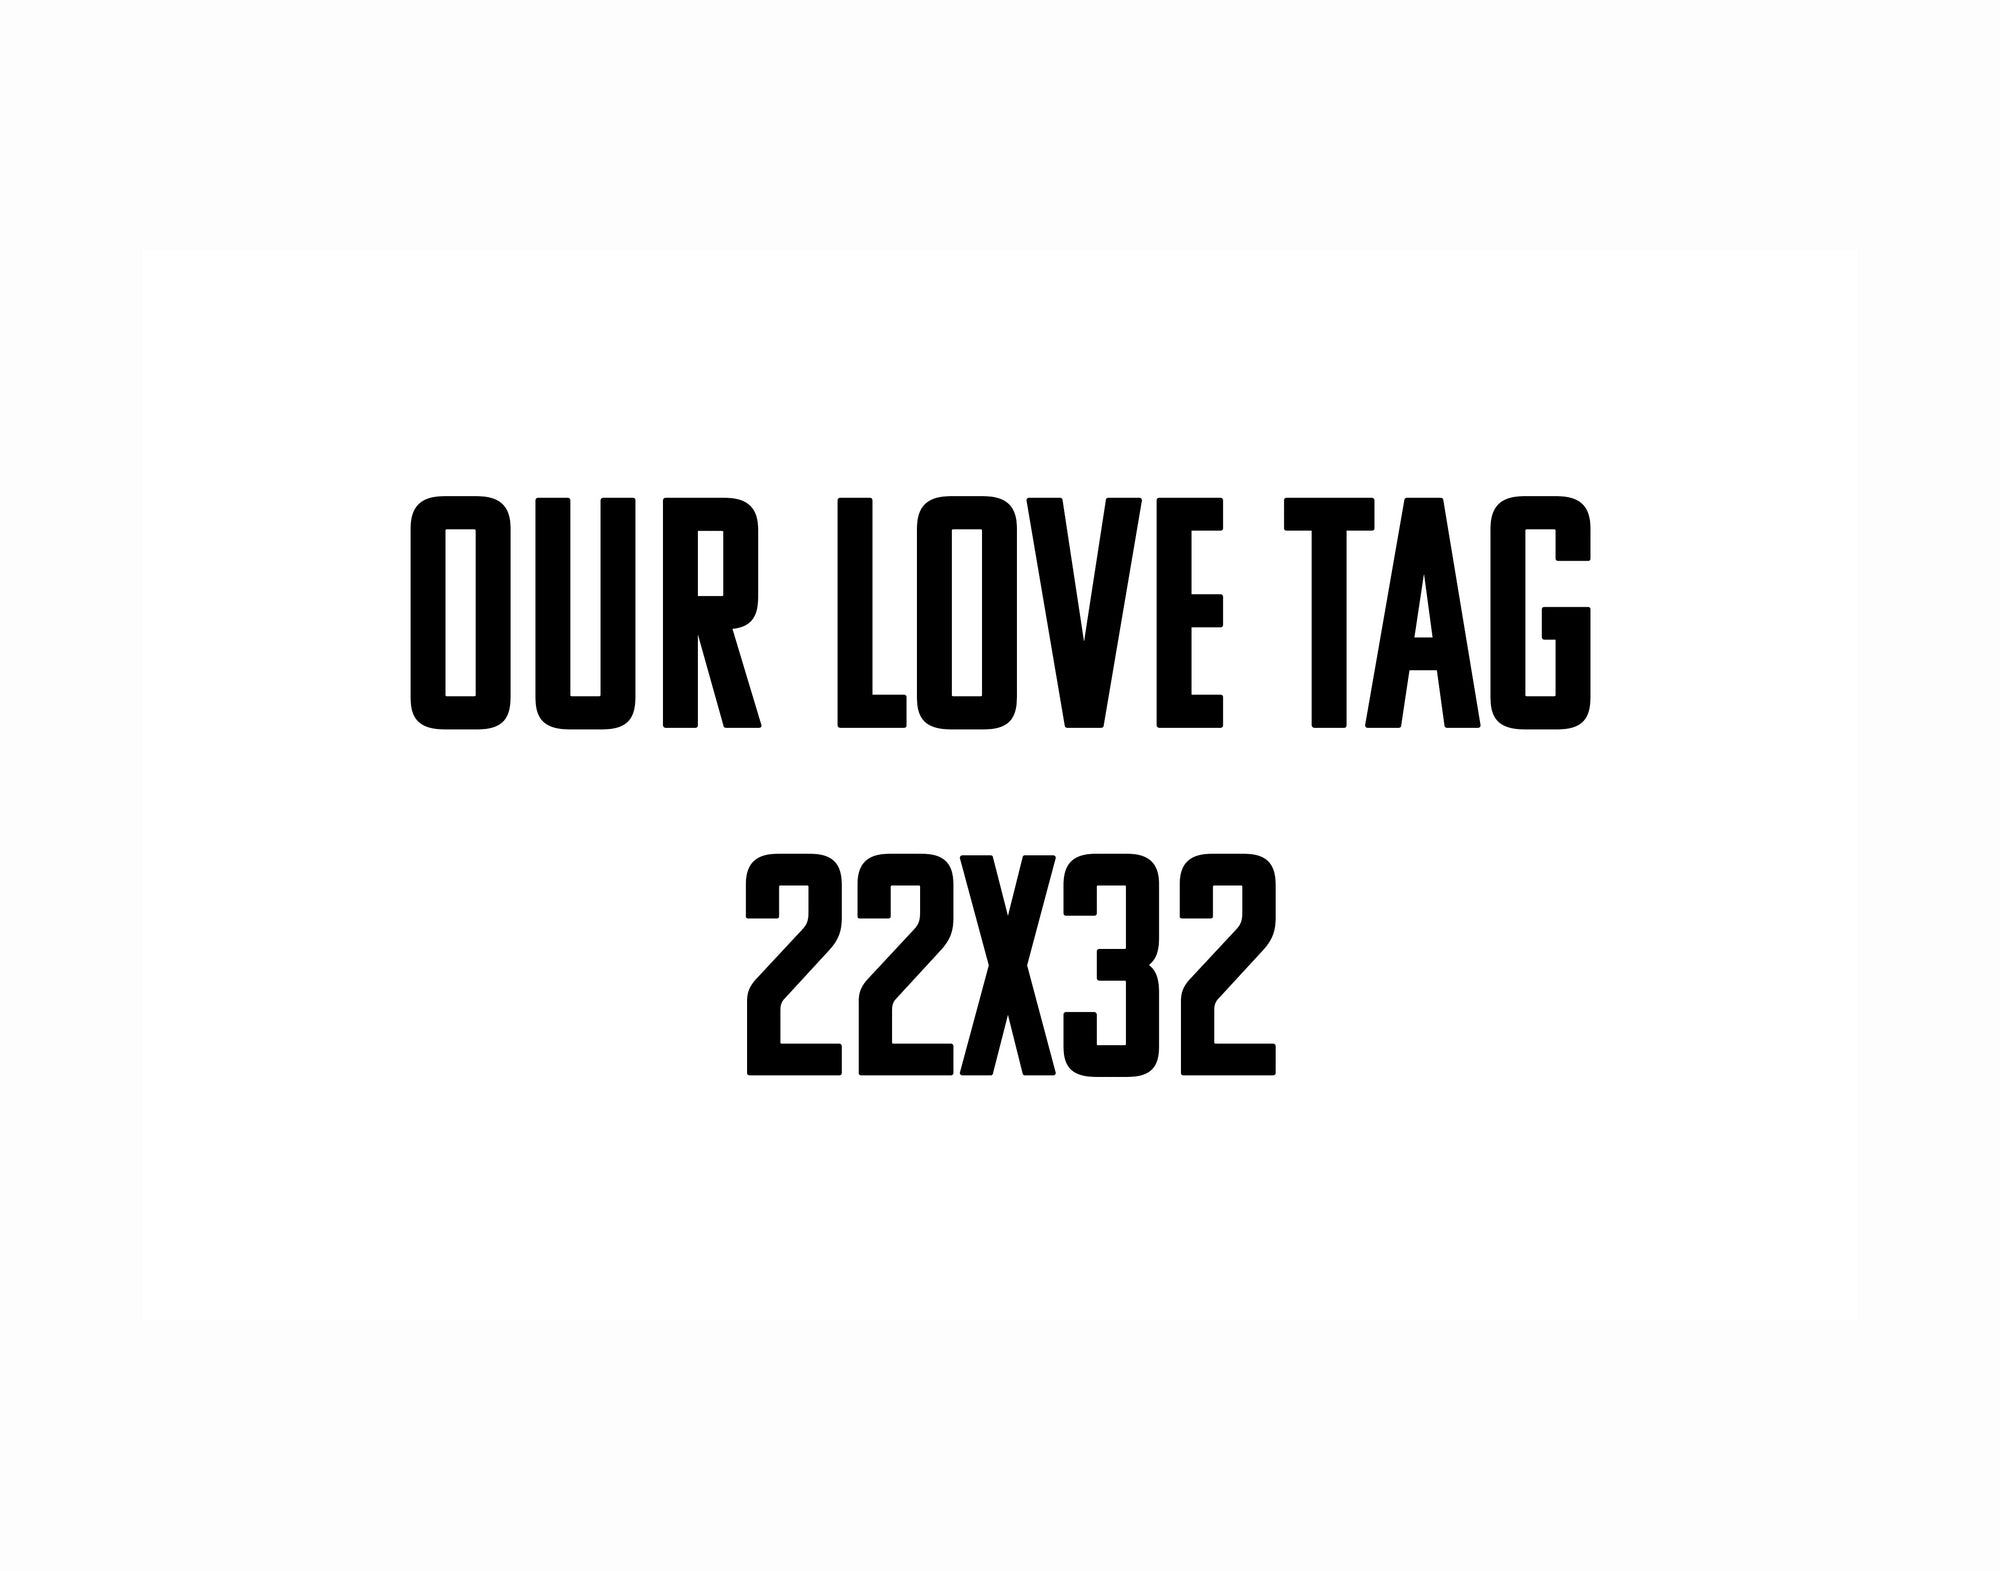 4-Plank 22x32  Our Love Tag